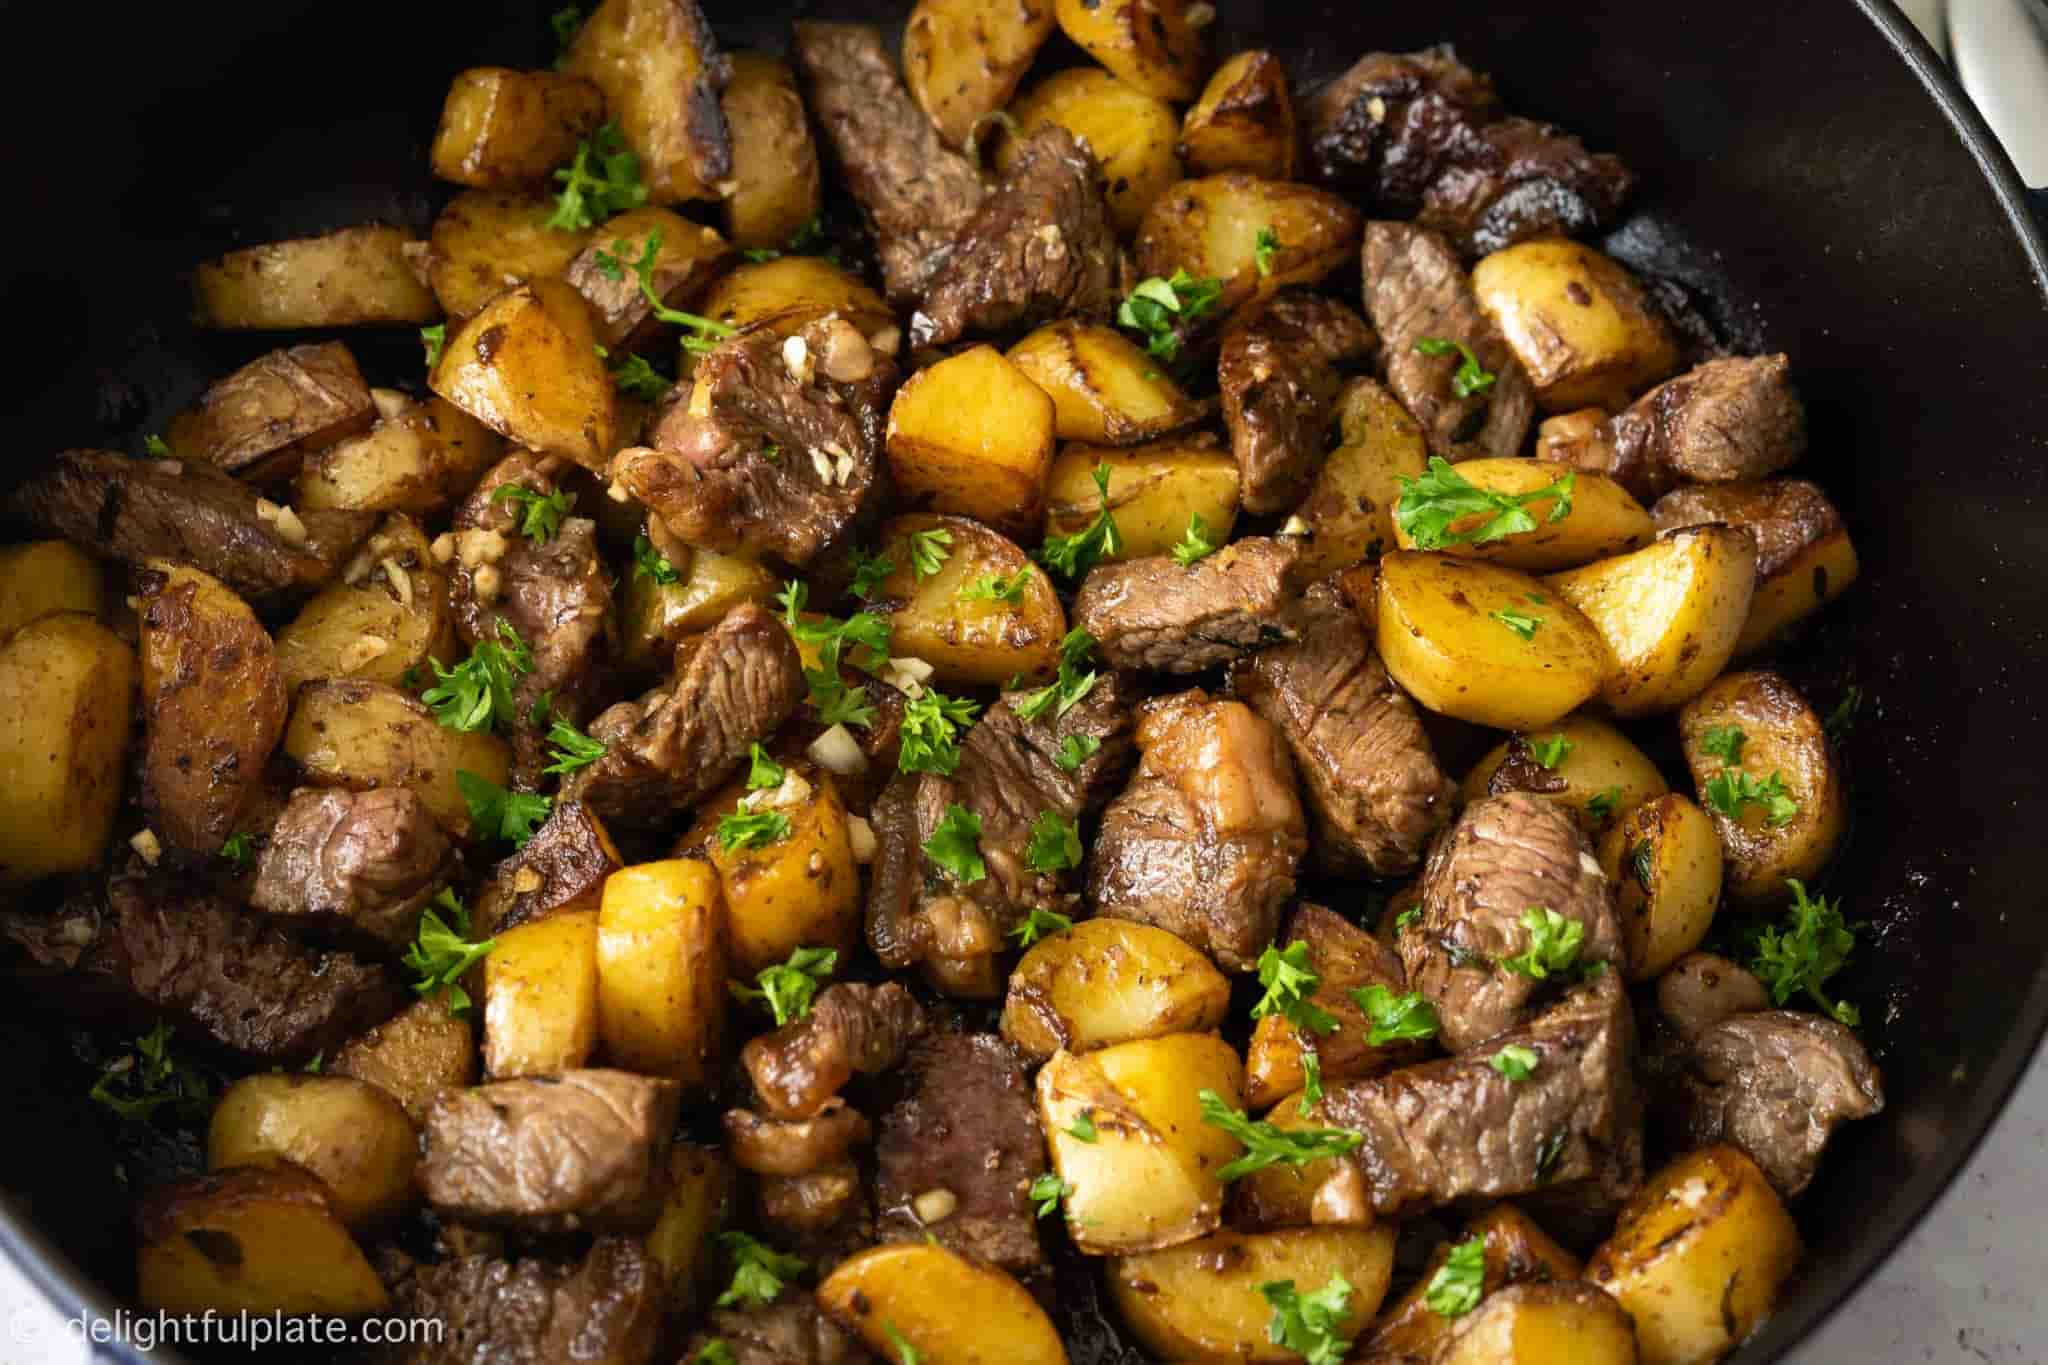 steak bites and potatoes in a pan.